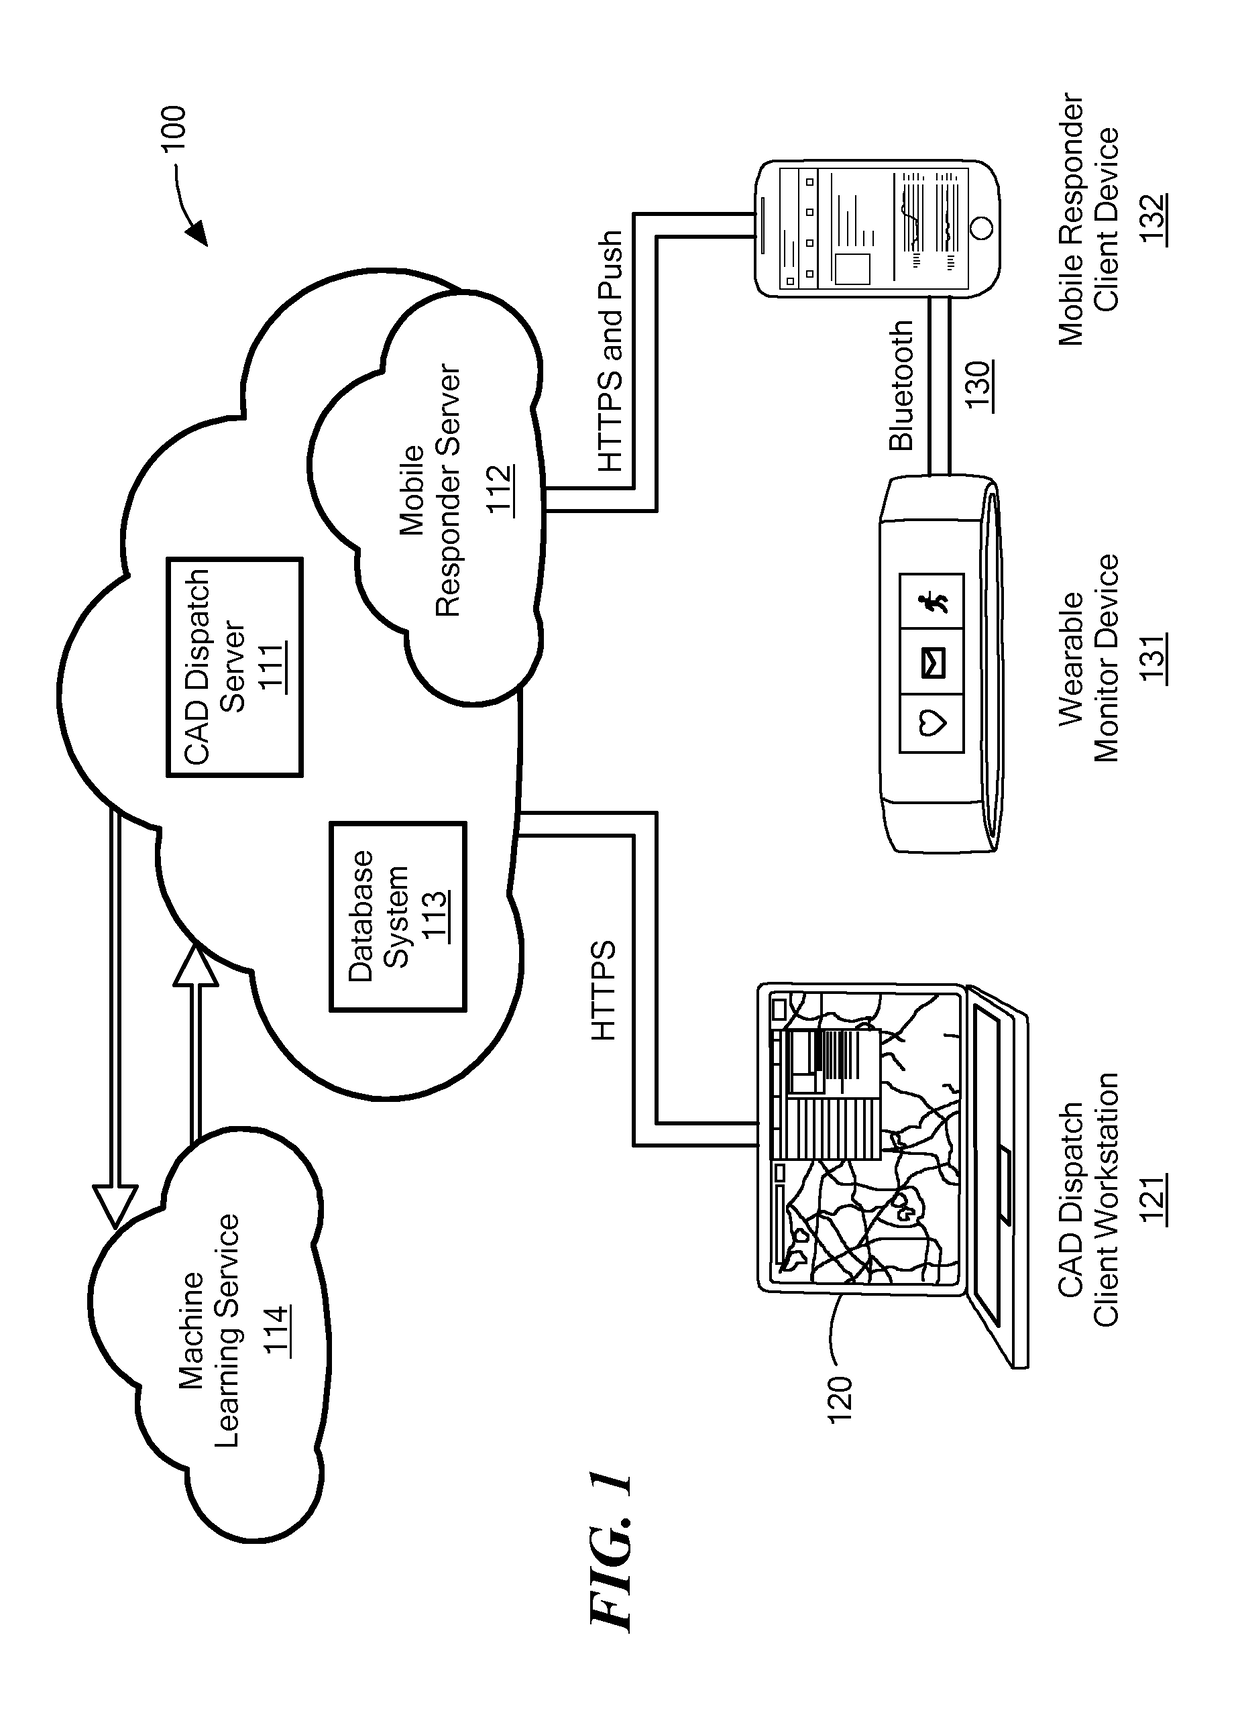 Computer-Aided Dispatch Systems and Methods Utilizing Biometrics to Assess Responder Condition and Suitability